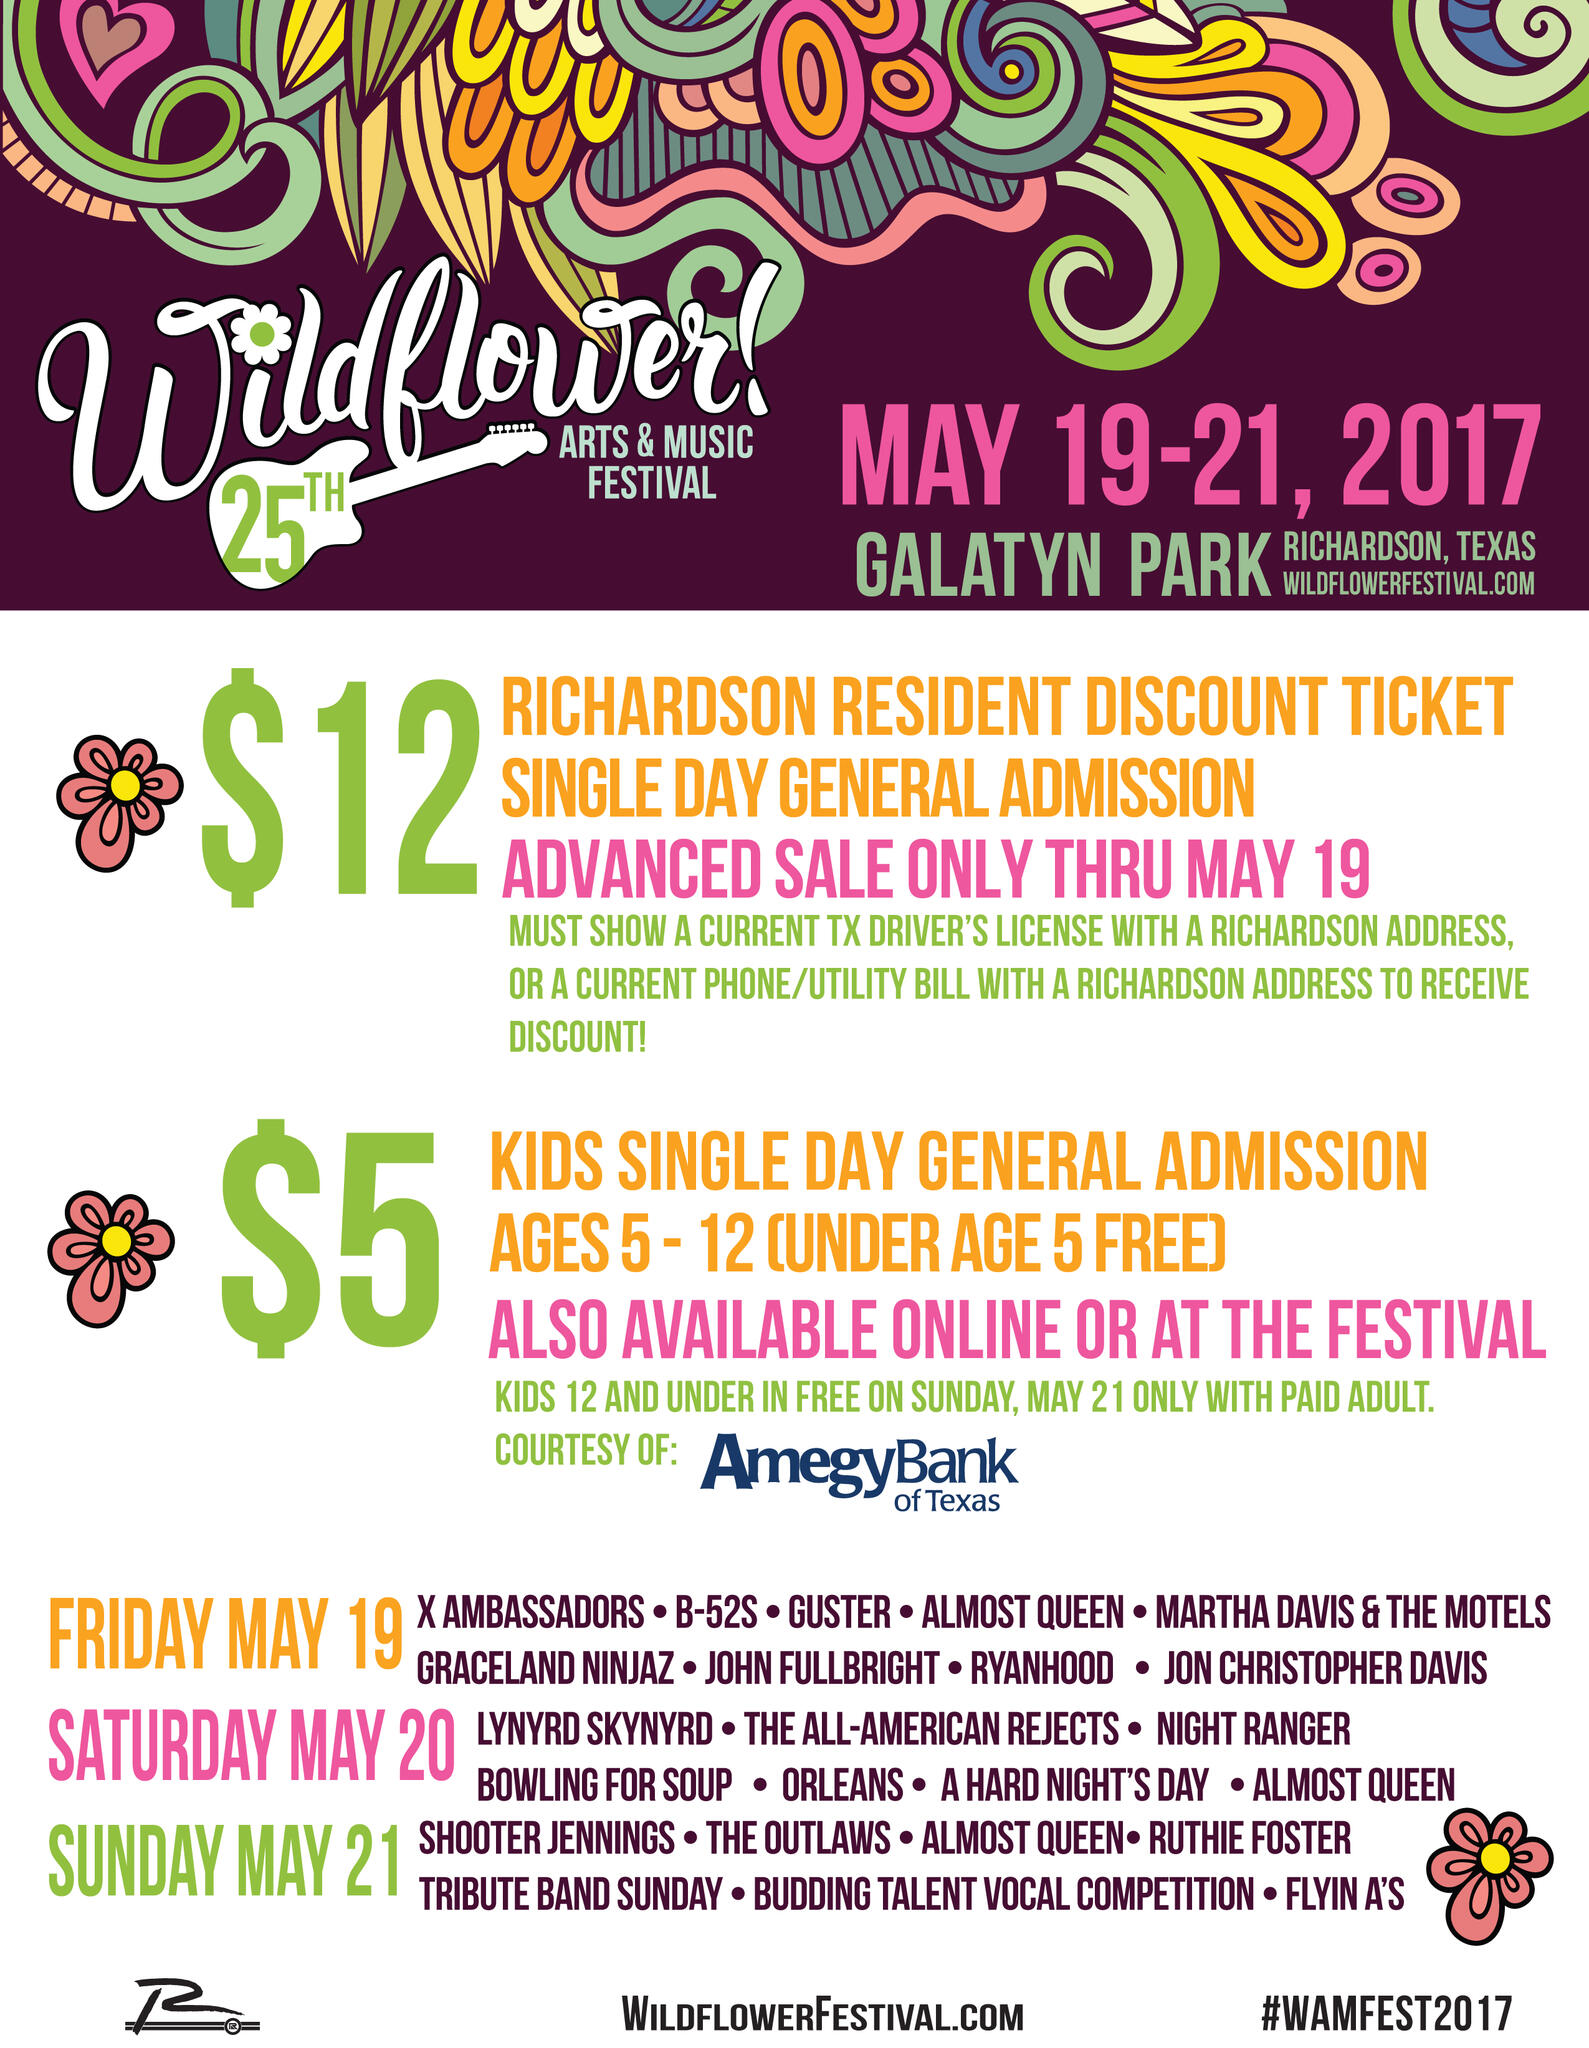 Reduced Price Tickets For Wildflower! Available For Richardson